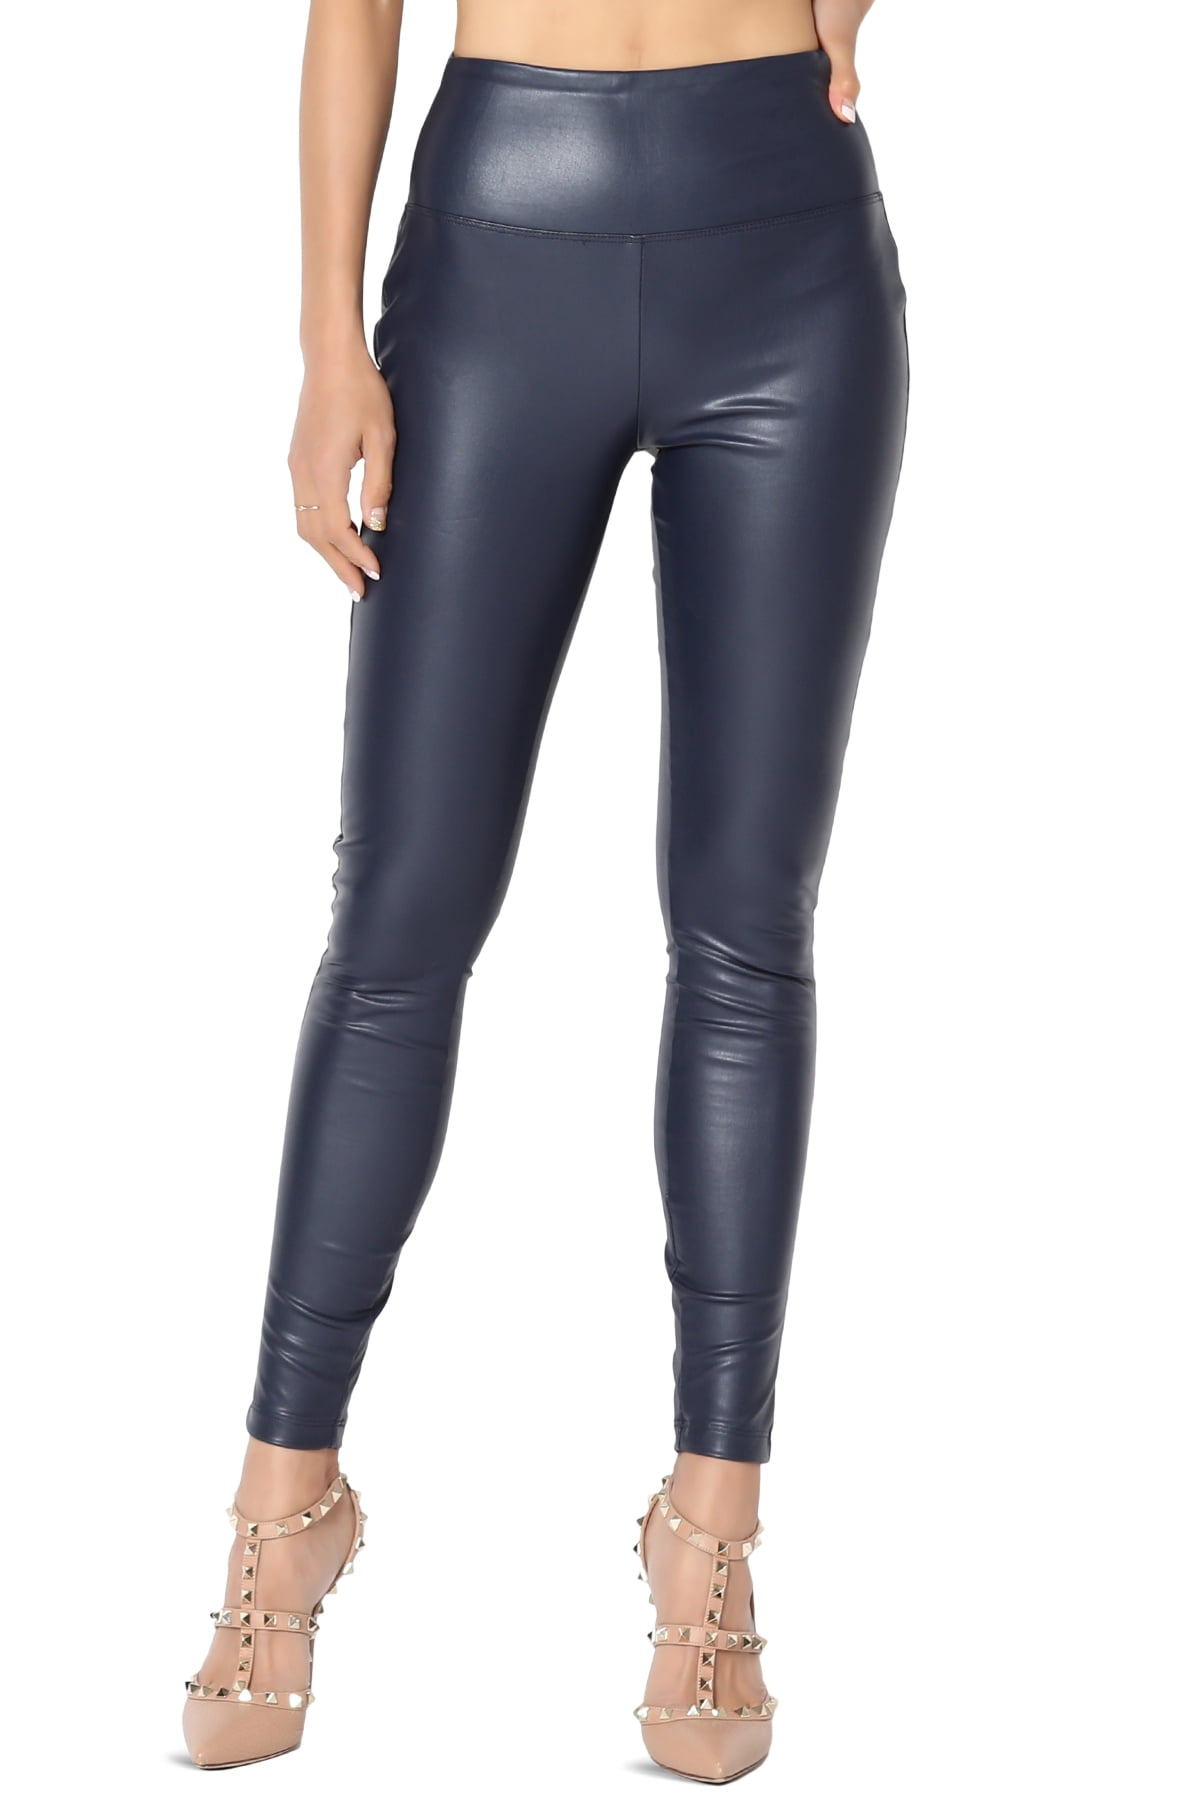 Themogan Women S Sexy Faux Leather Wide Band High Waist Leggings Tights Pants